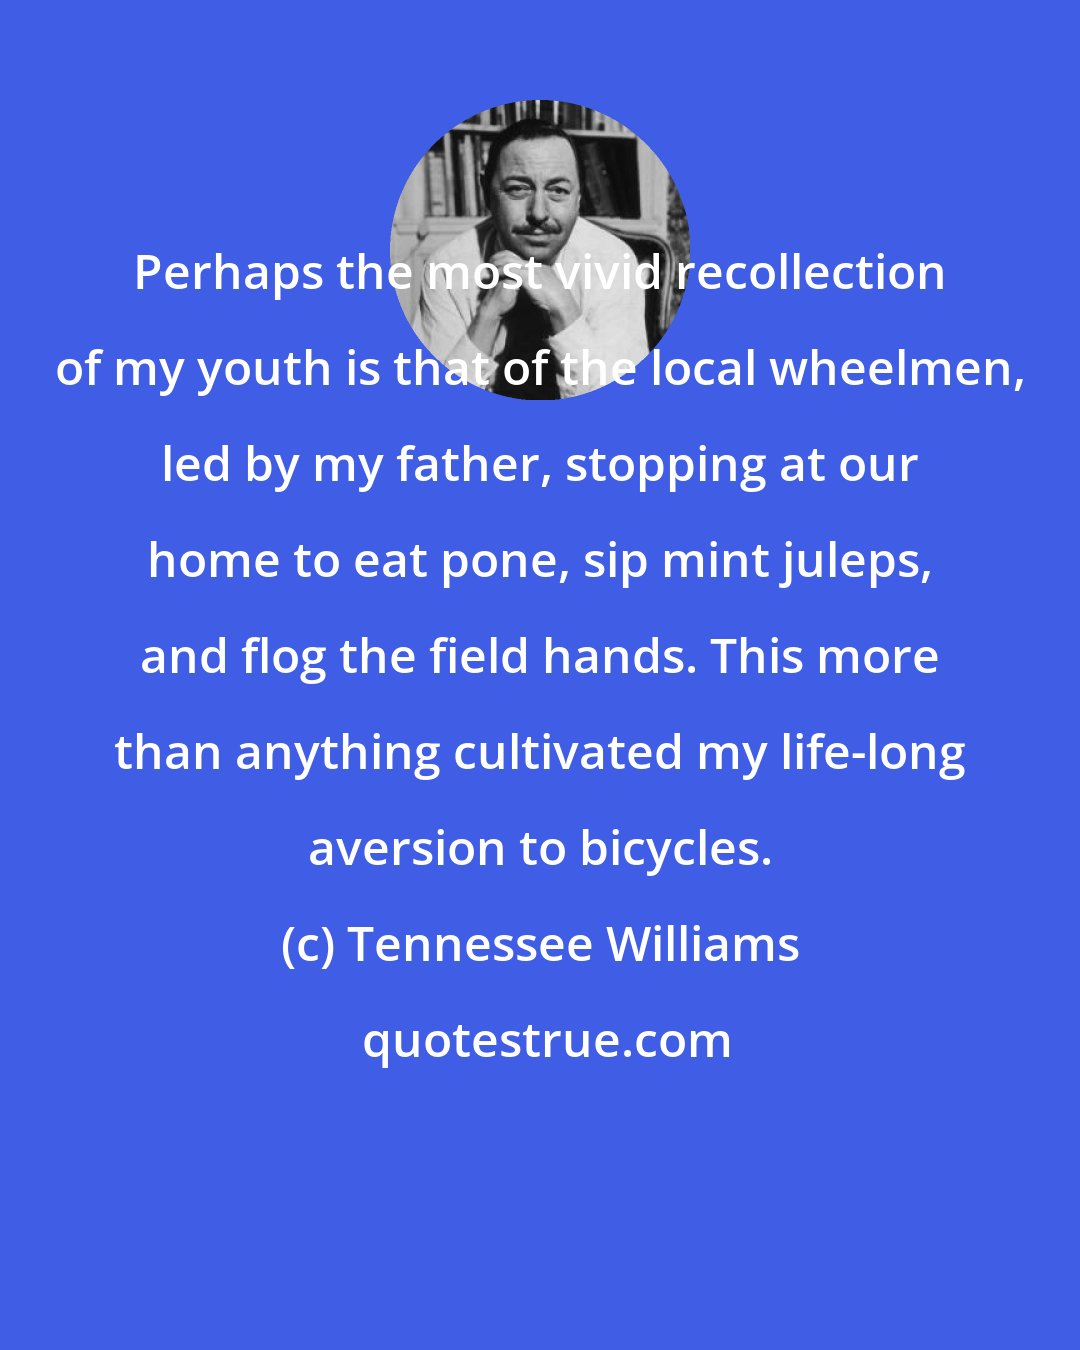 Tennessee Williams: Perhaps the most vivid recollection of my youth is that of the local wheelmen, led by my father, stopping at our home to eat pone, sip mint juleps, and flog the field hands. This more than anything cultivated my life-long aversion to bicycles.